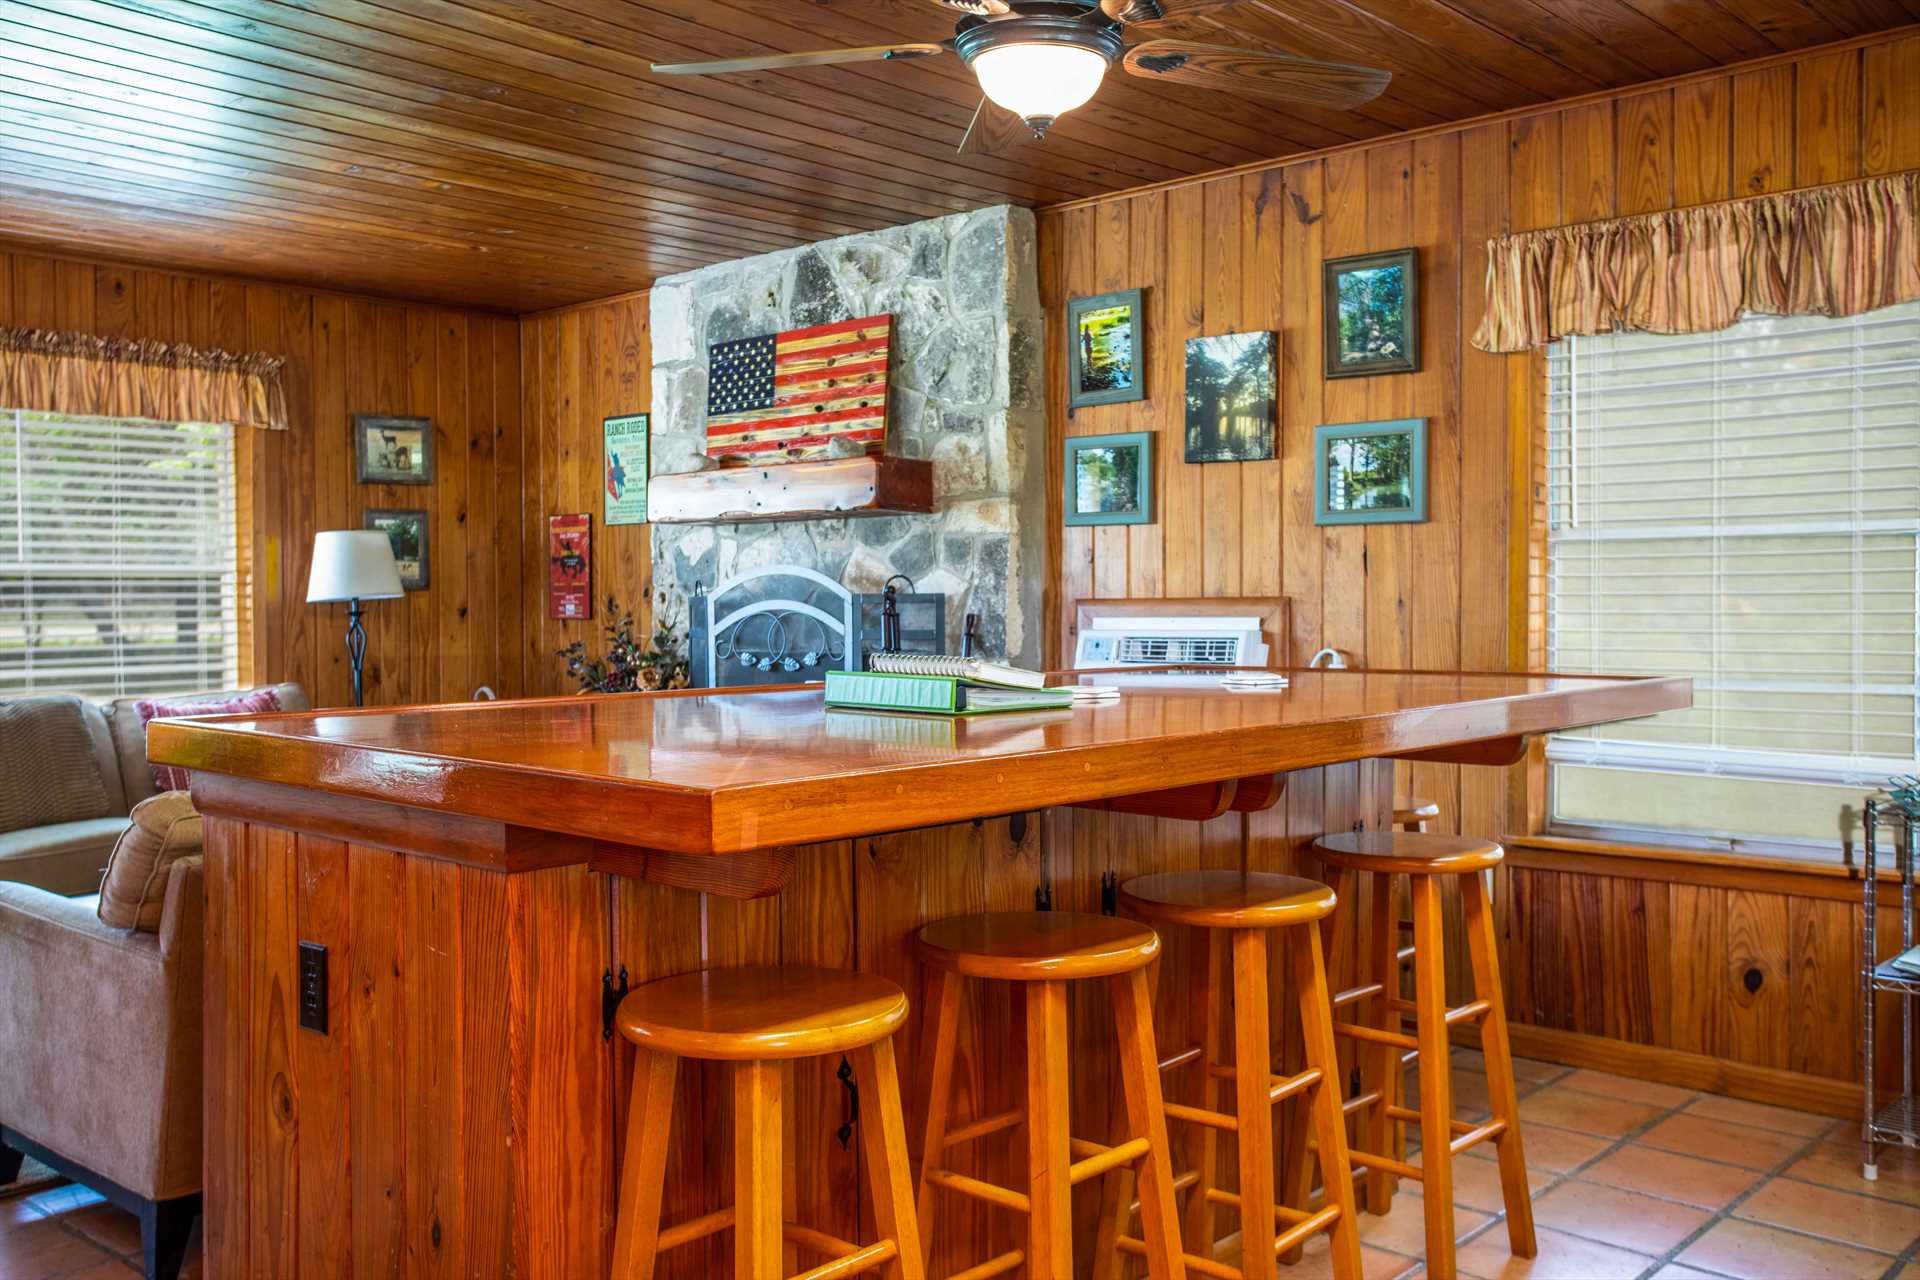                                                 The unique island bar in the kitchen not only provides plenty of food prep space, but includes bar-style seating for up to ten!